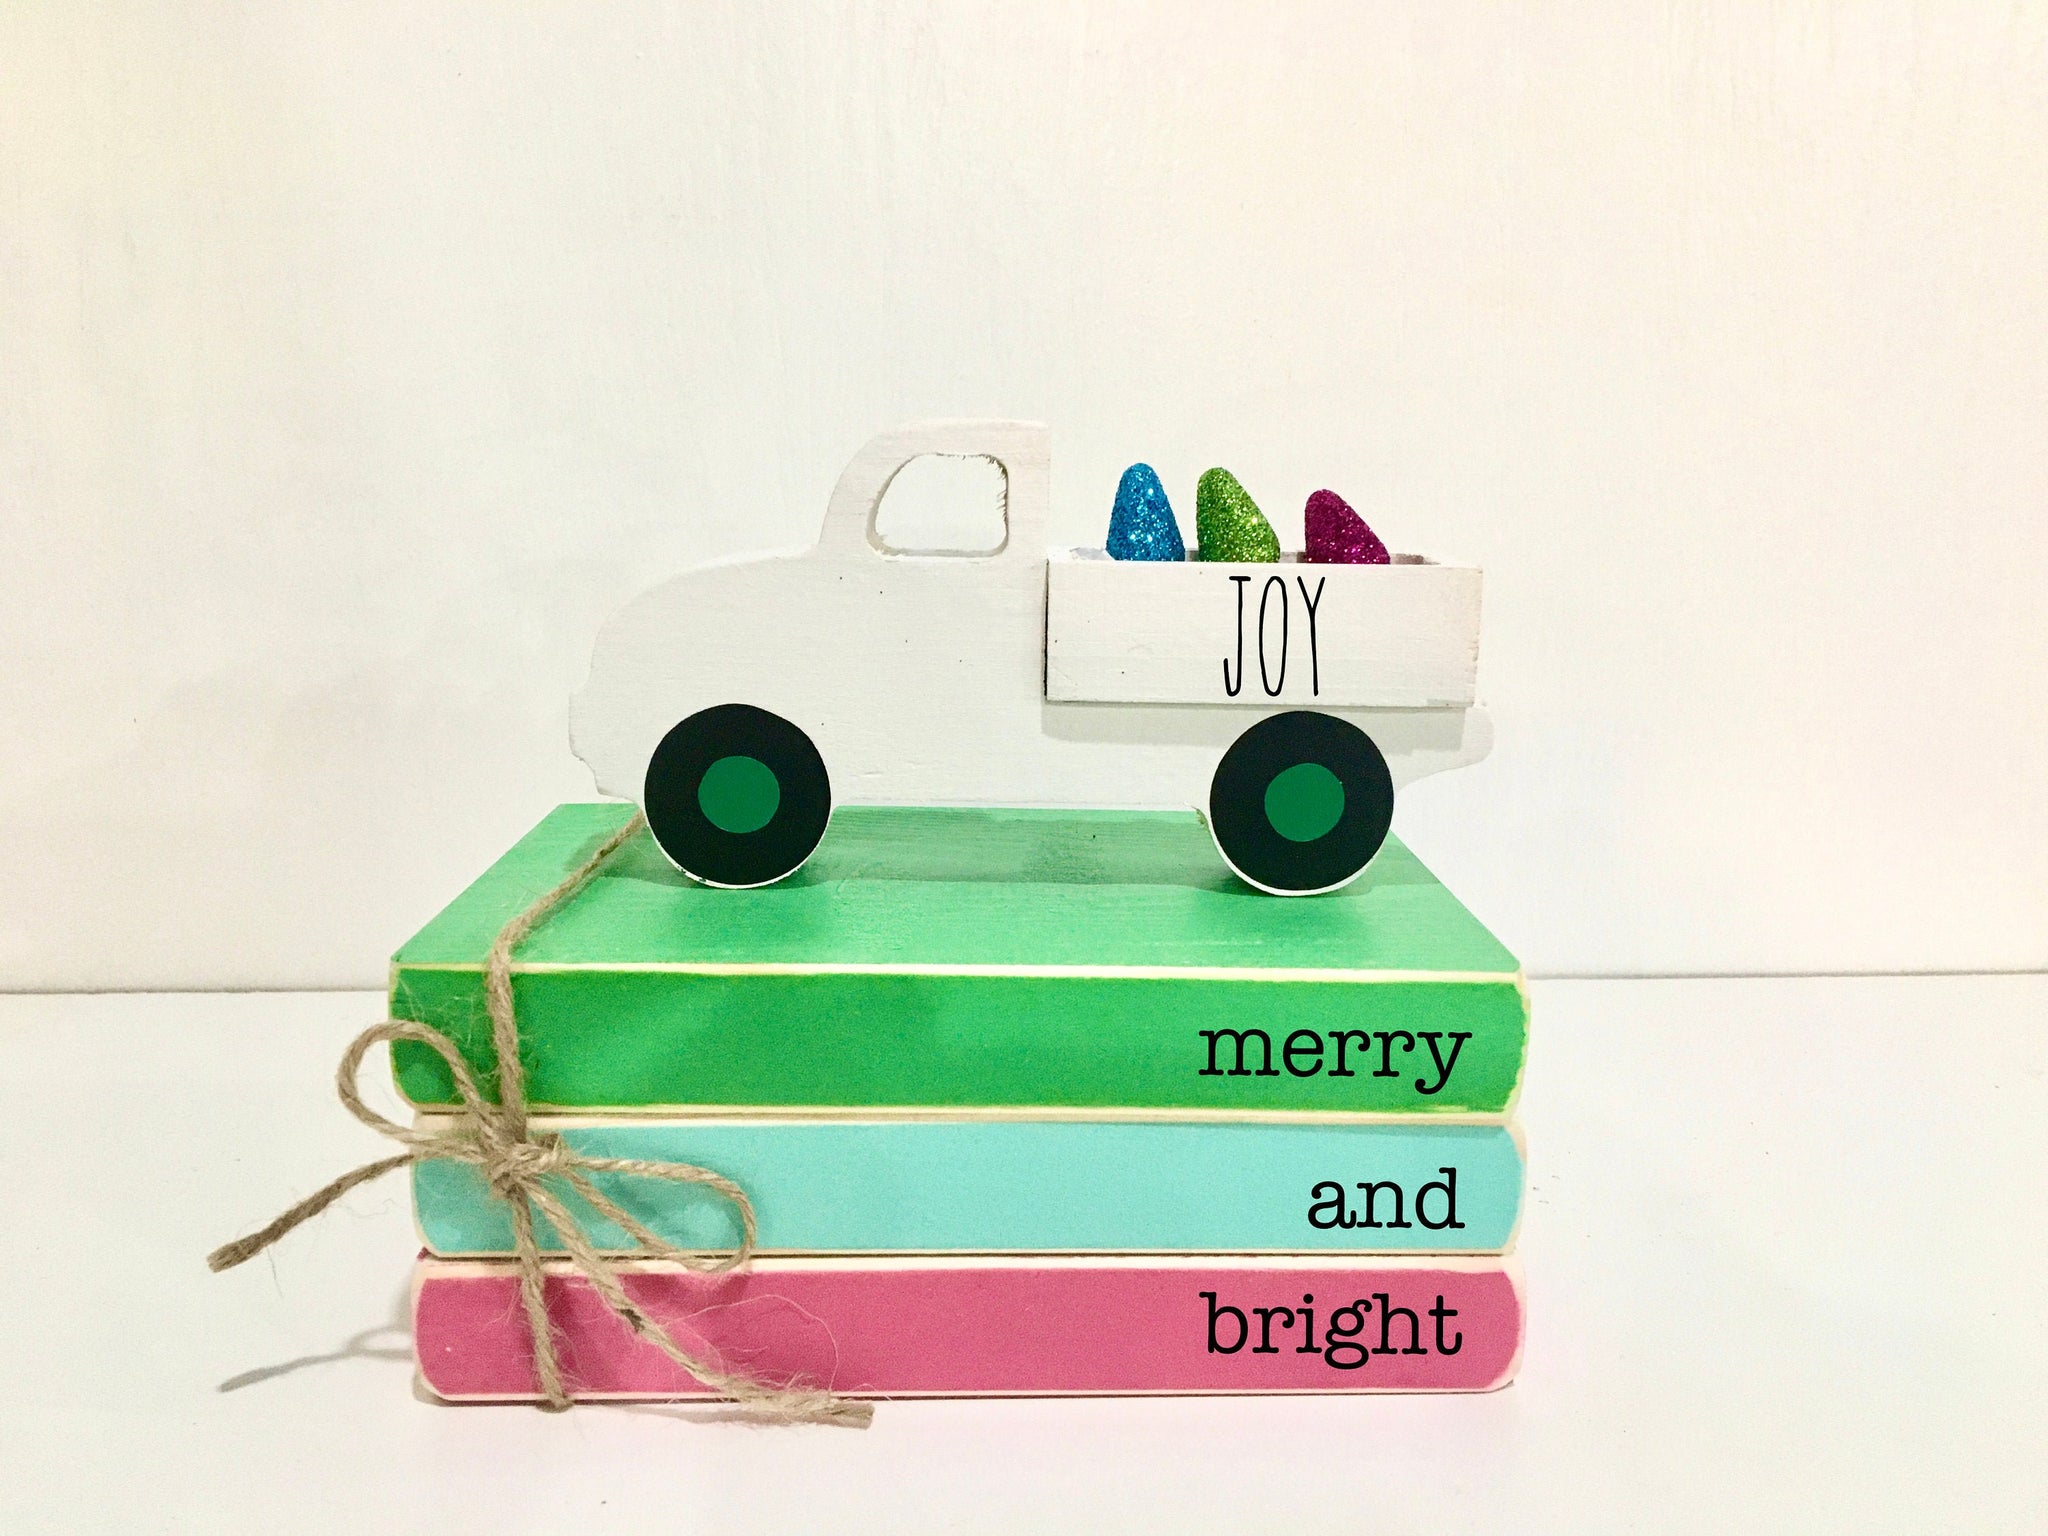 Christmas tiered tray decor, Tiered tray books, Merry and bright, Christmas decor, Wooden truck, Christmas lights, Mini book bundle